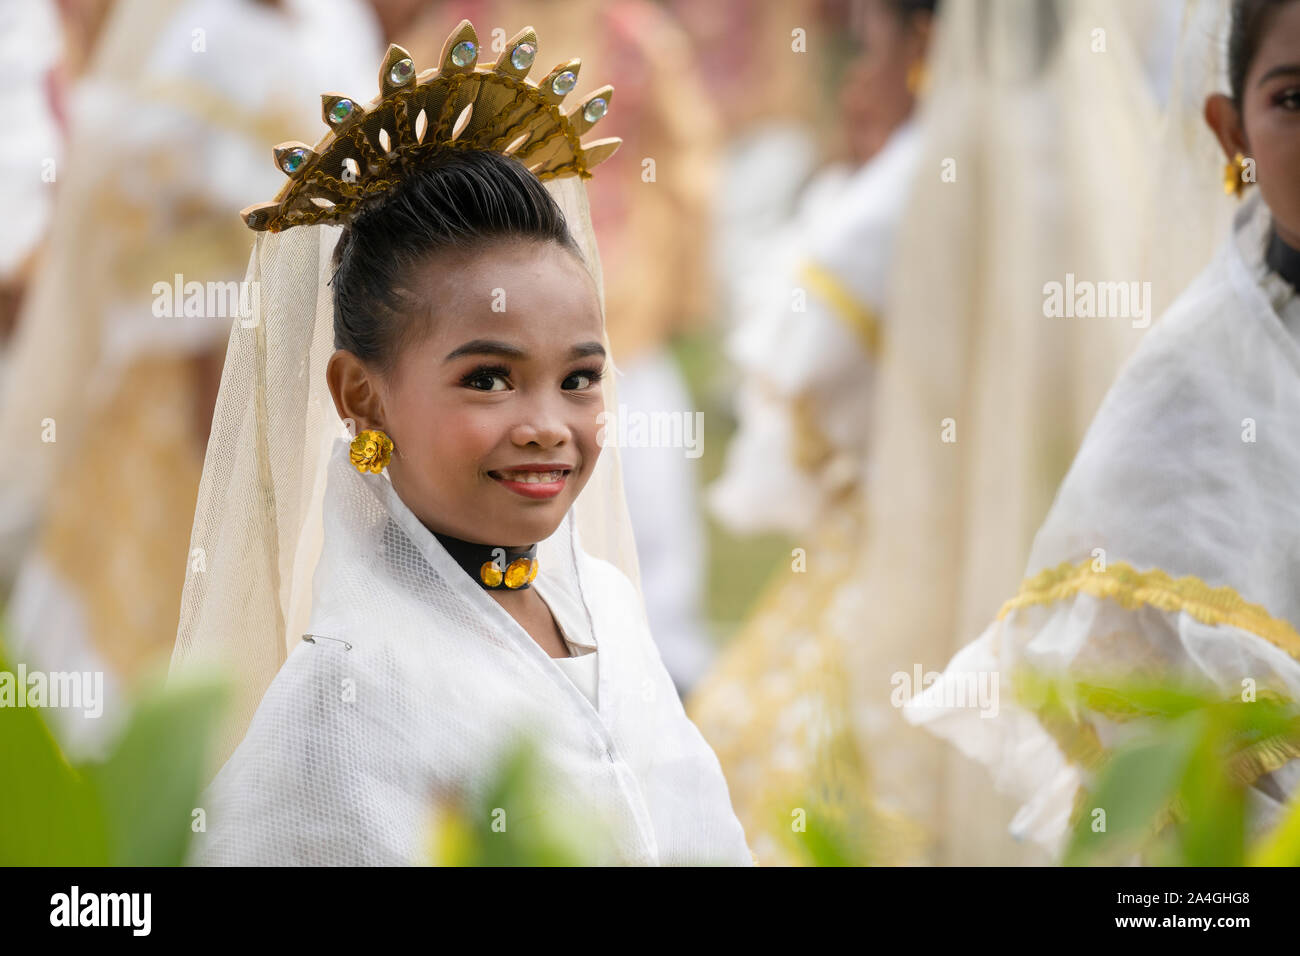 A young girl taking partin a local street dancing parade smiles at the camera as her picture is taken. Stock Photo